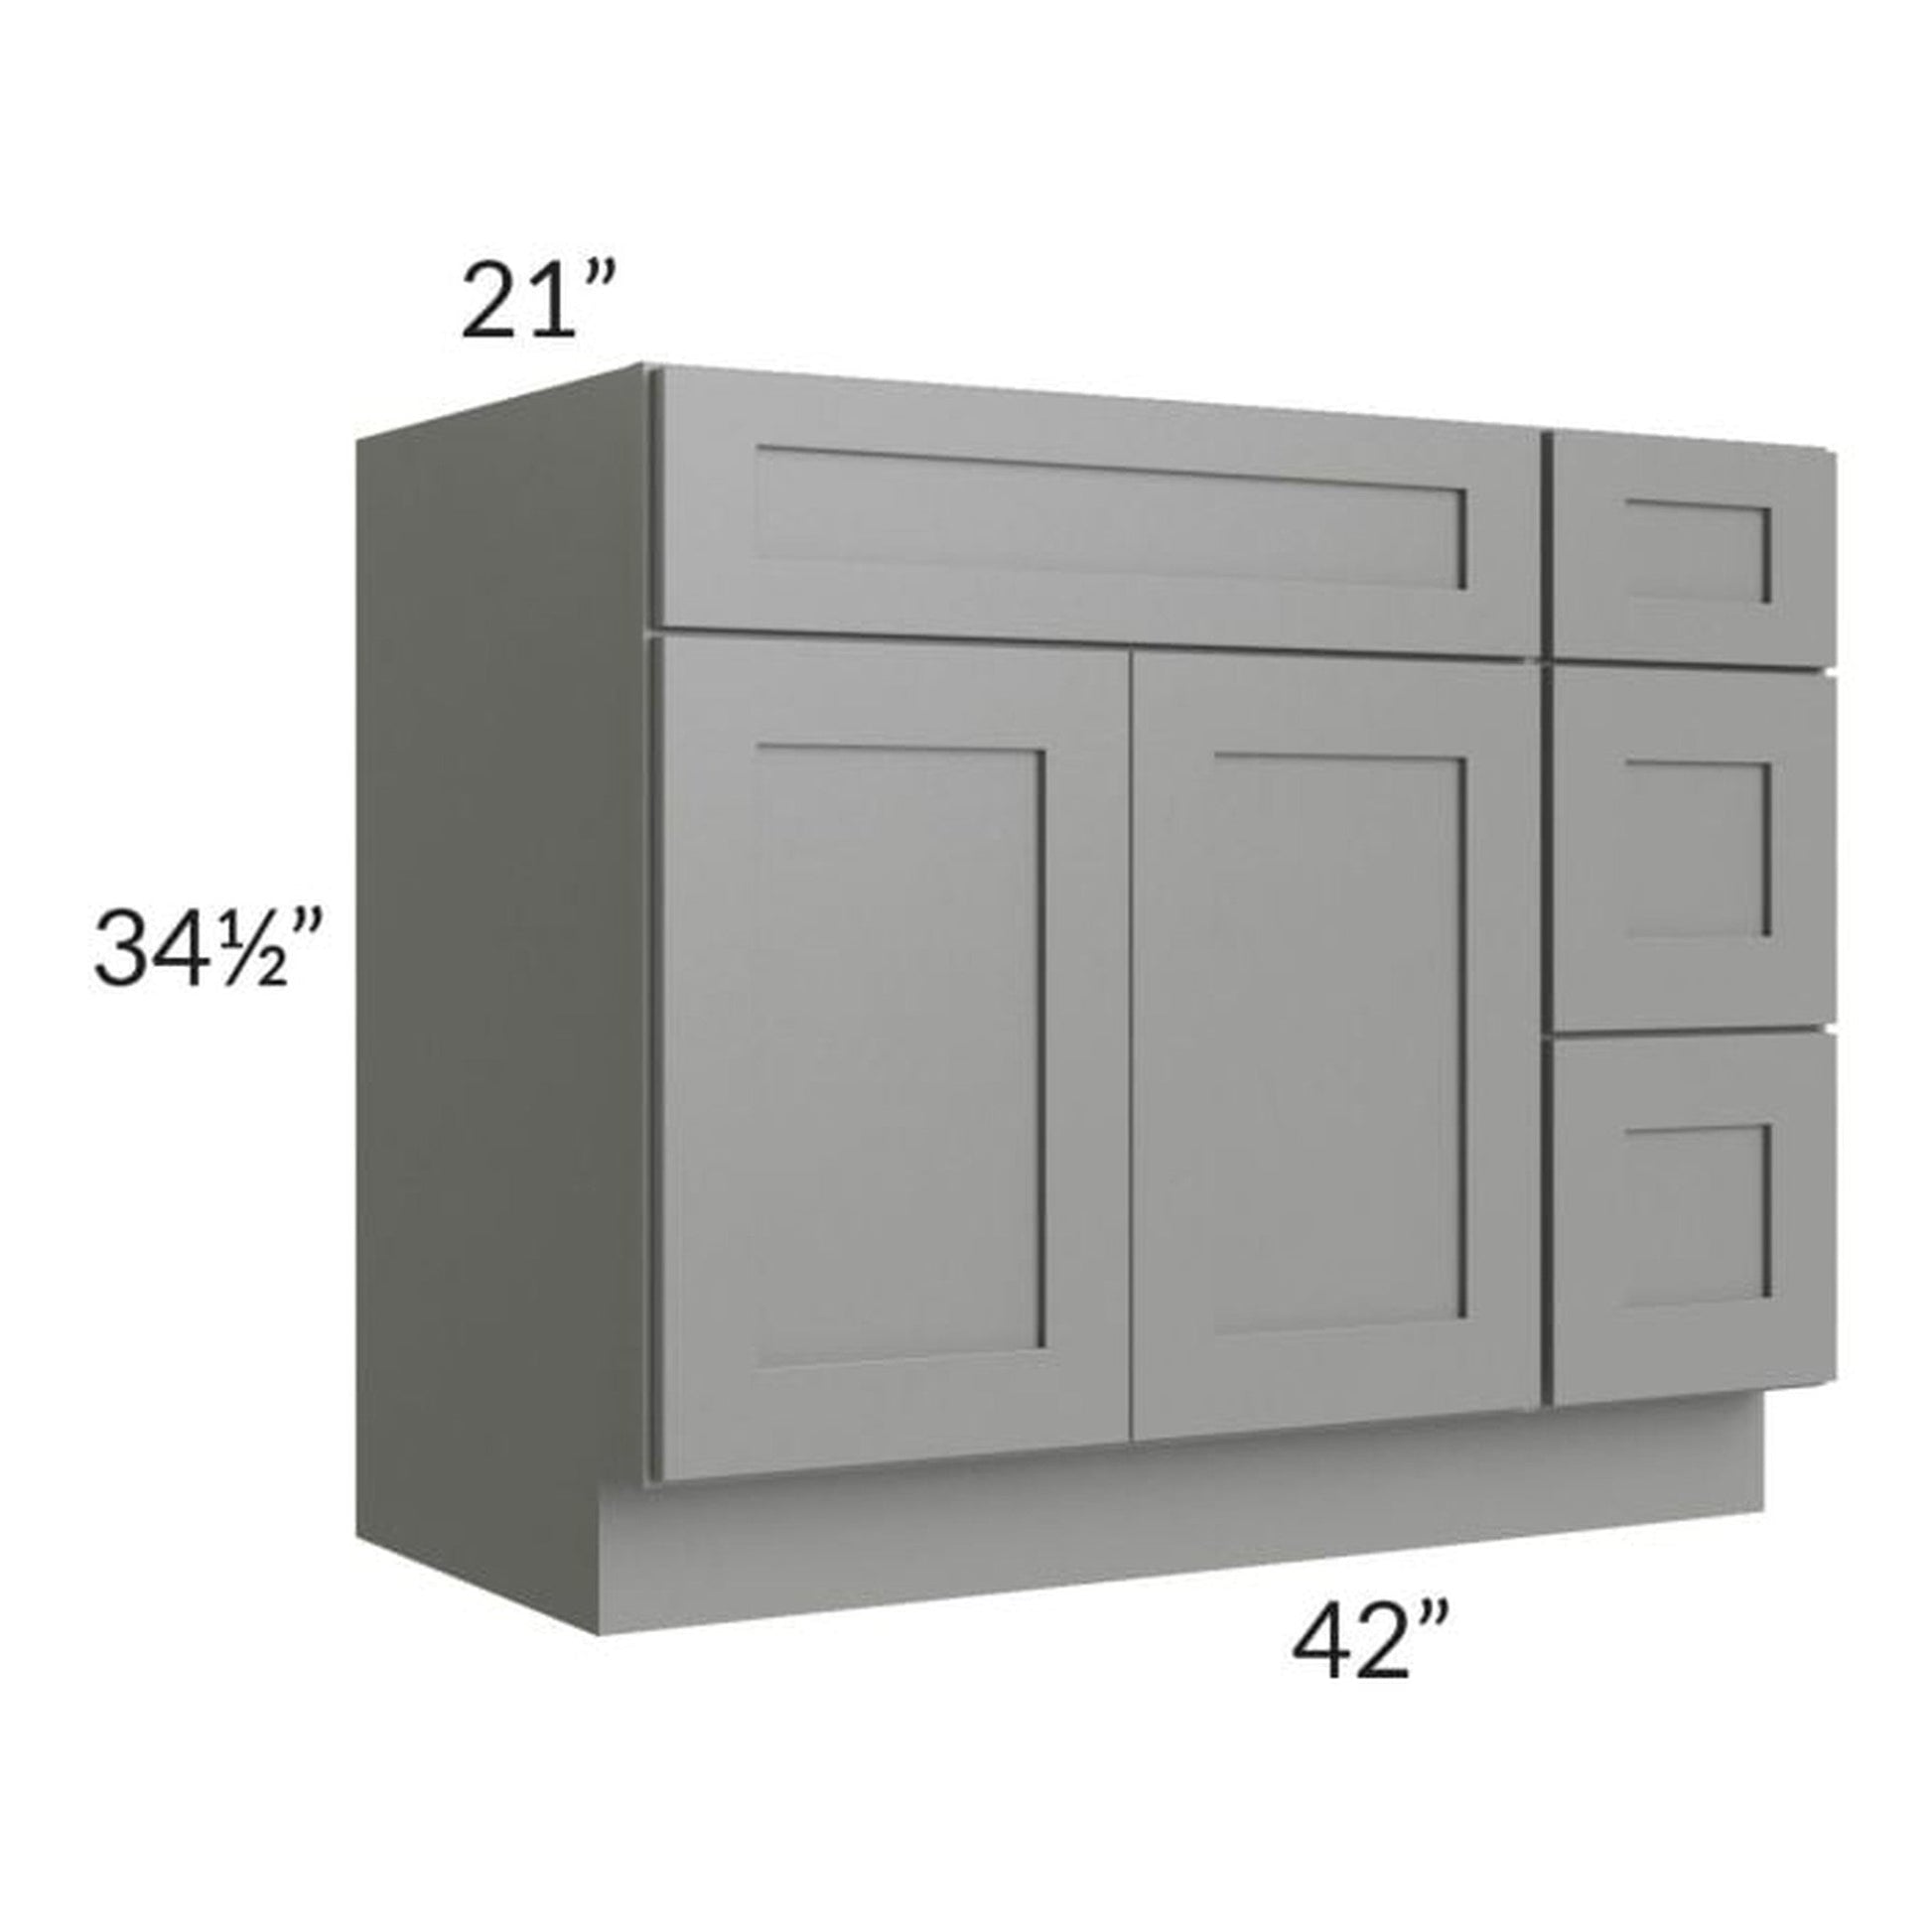 RTA Shale Grey Shaker 42" Vanity Sink Base Cabinet (Drawers on Right) with 2 Decorative End Panels